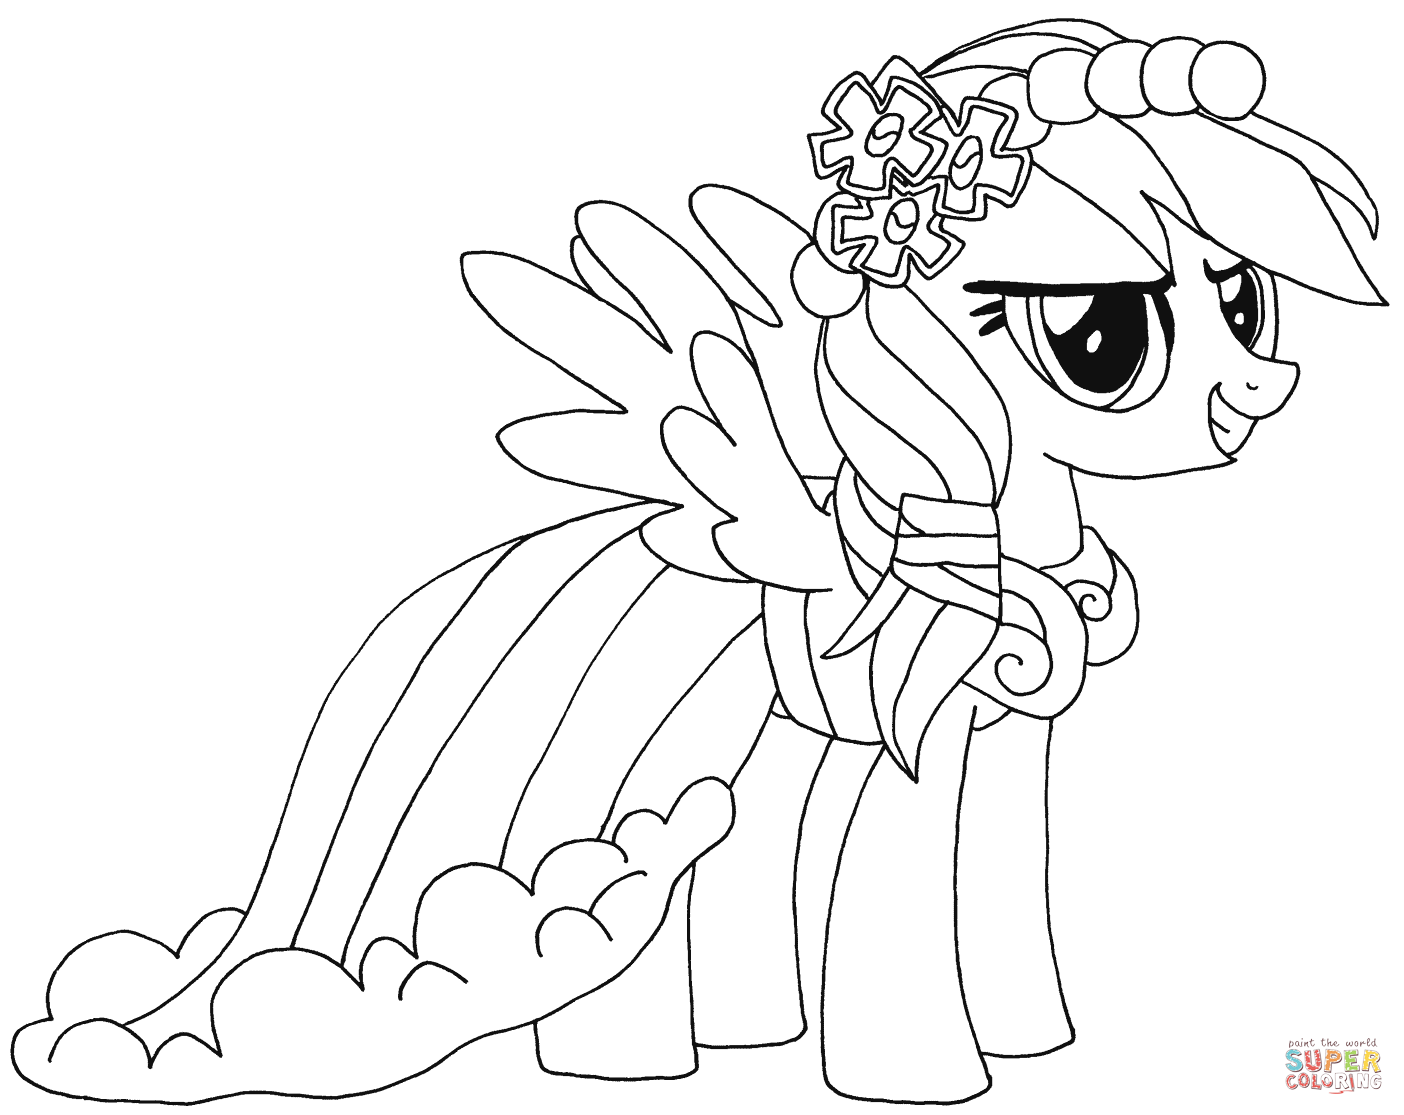 Rainbow Dash Coloring Page | Free Printable Coloring Pages - Coloring Home